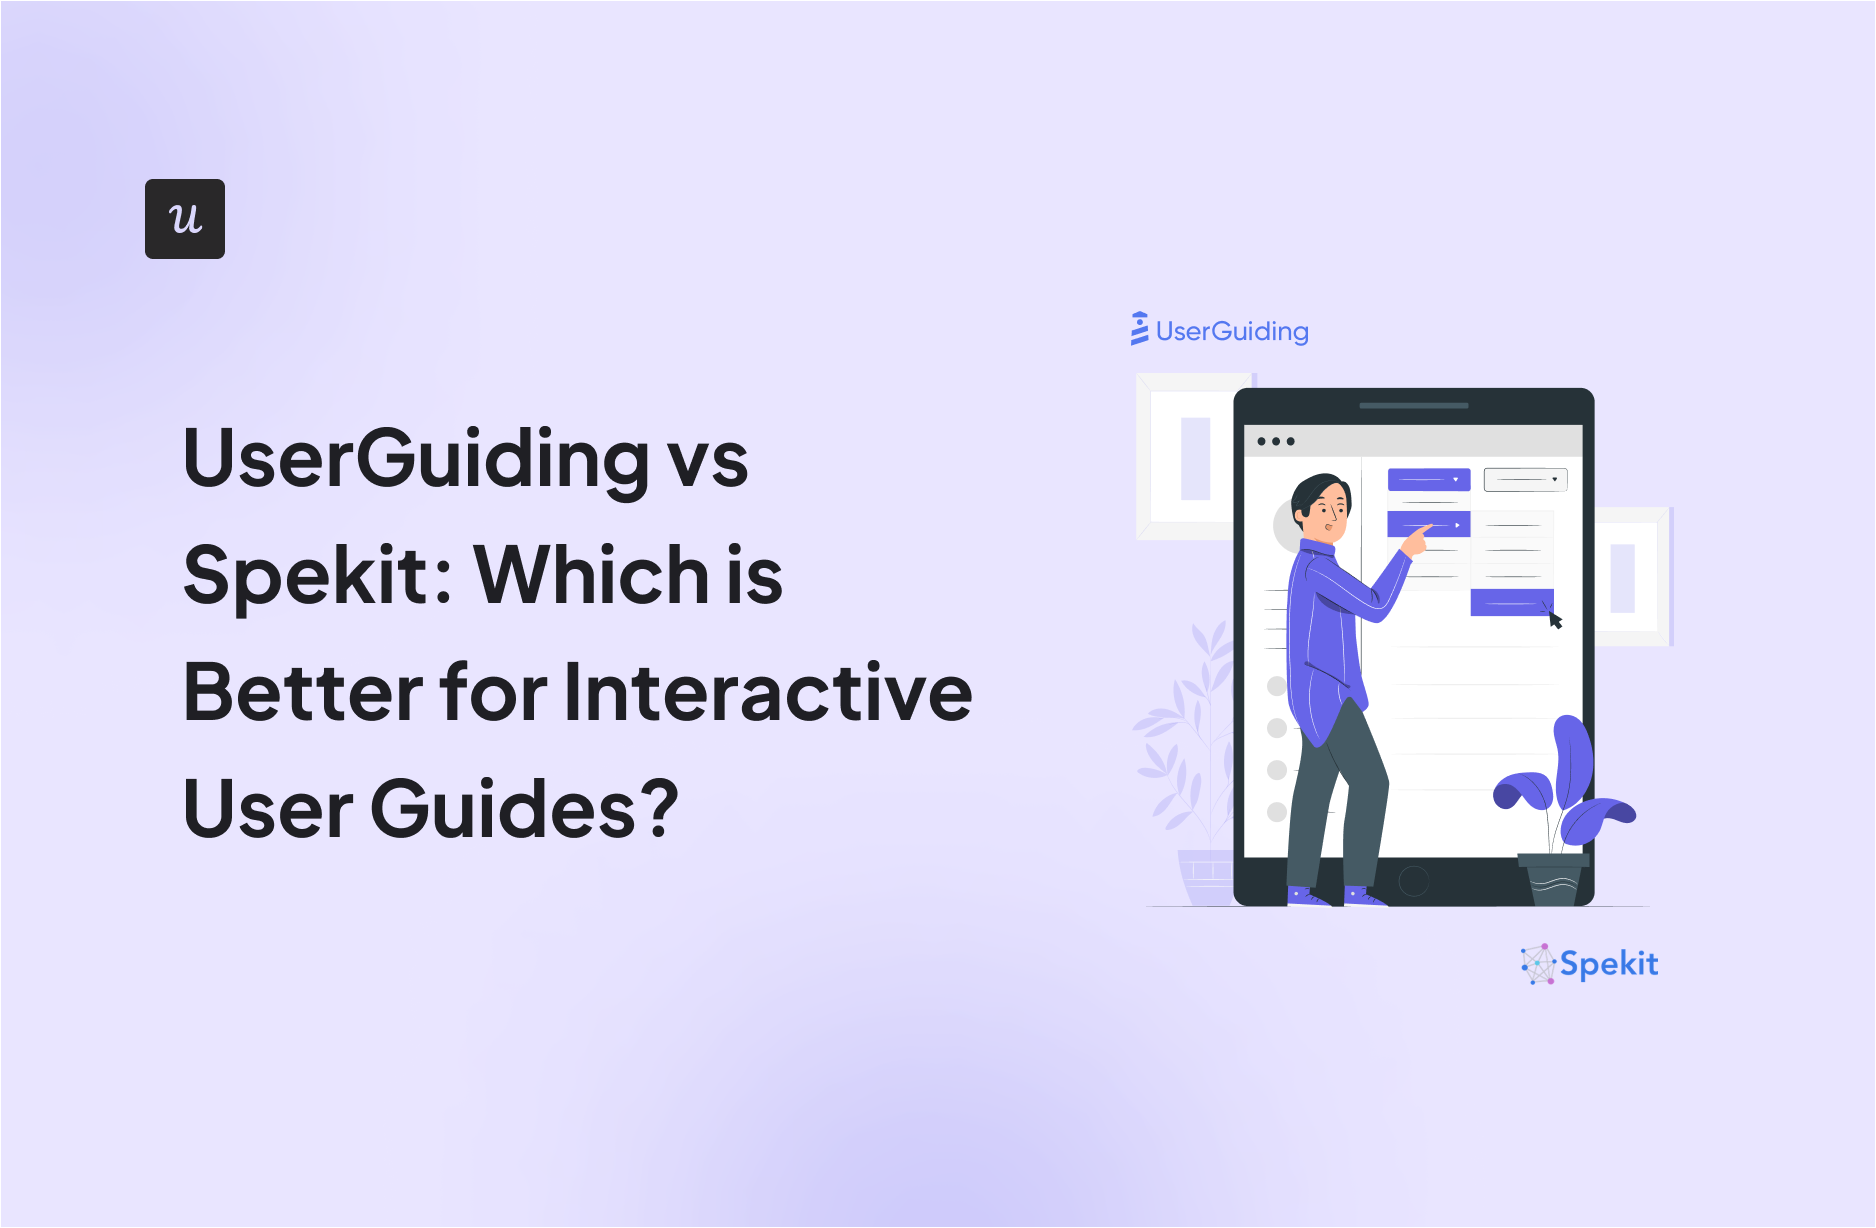 UserGuiding vs Spekit: Which is Better for Interactive User Guides?